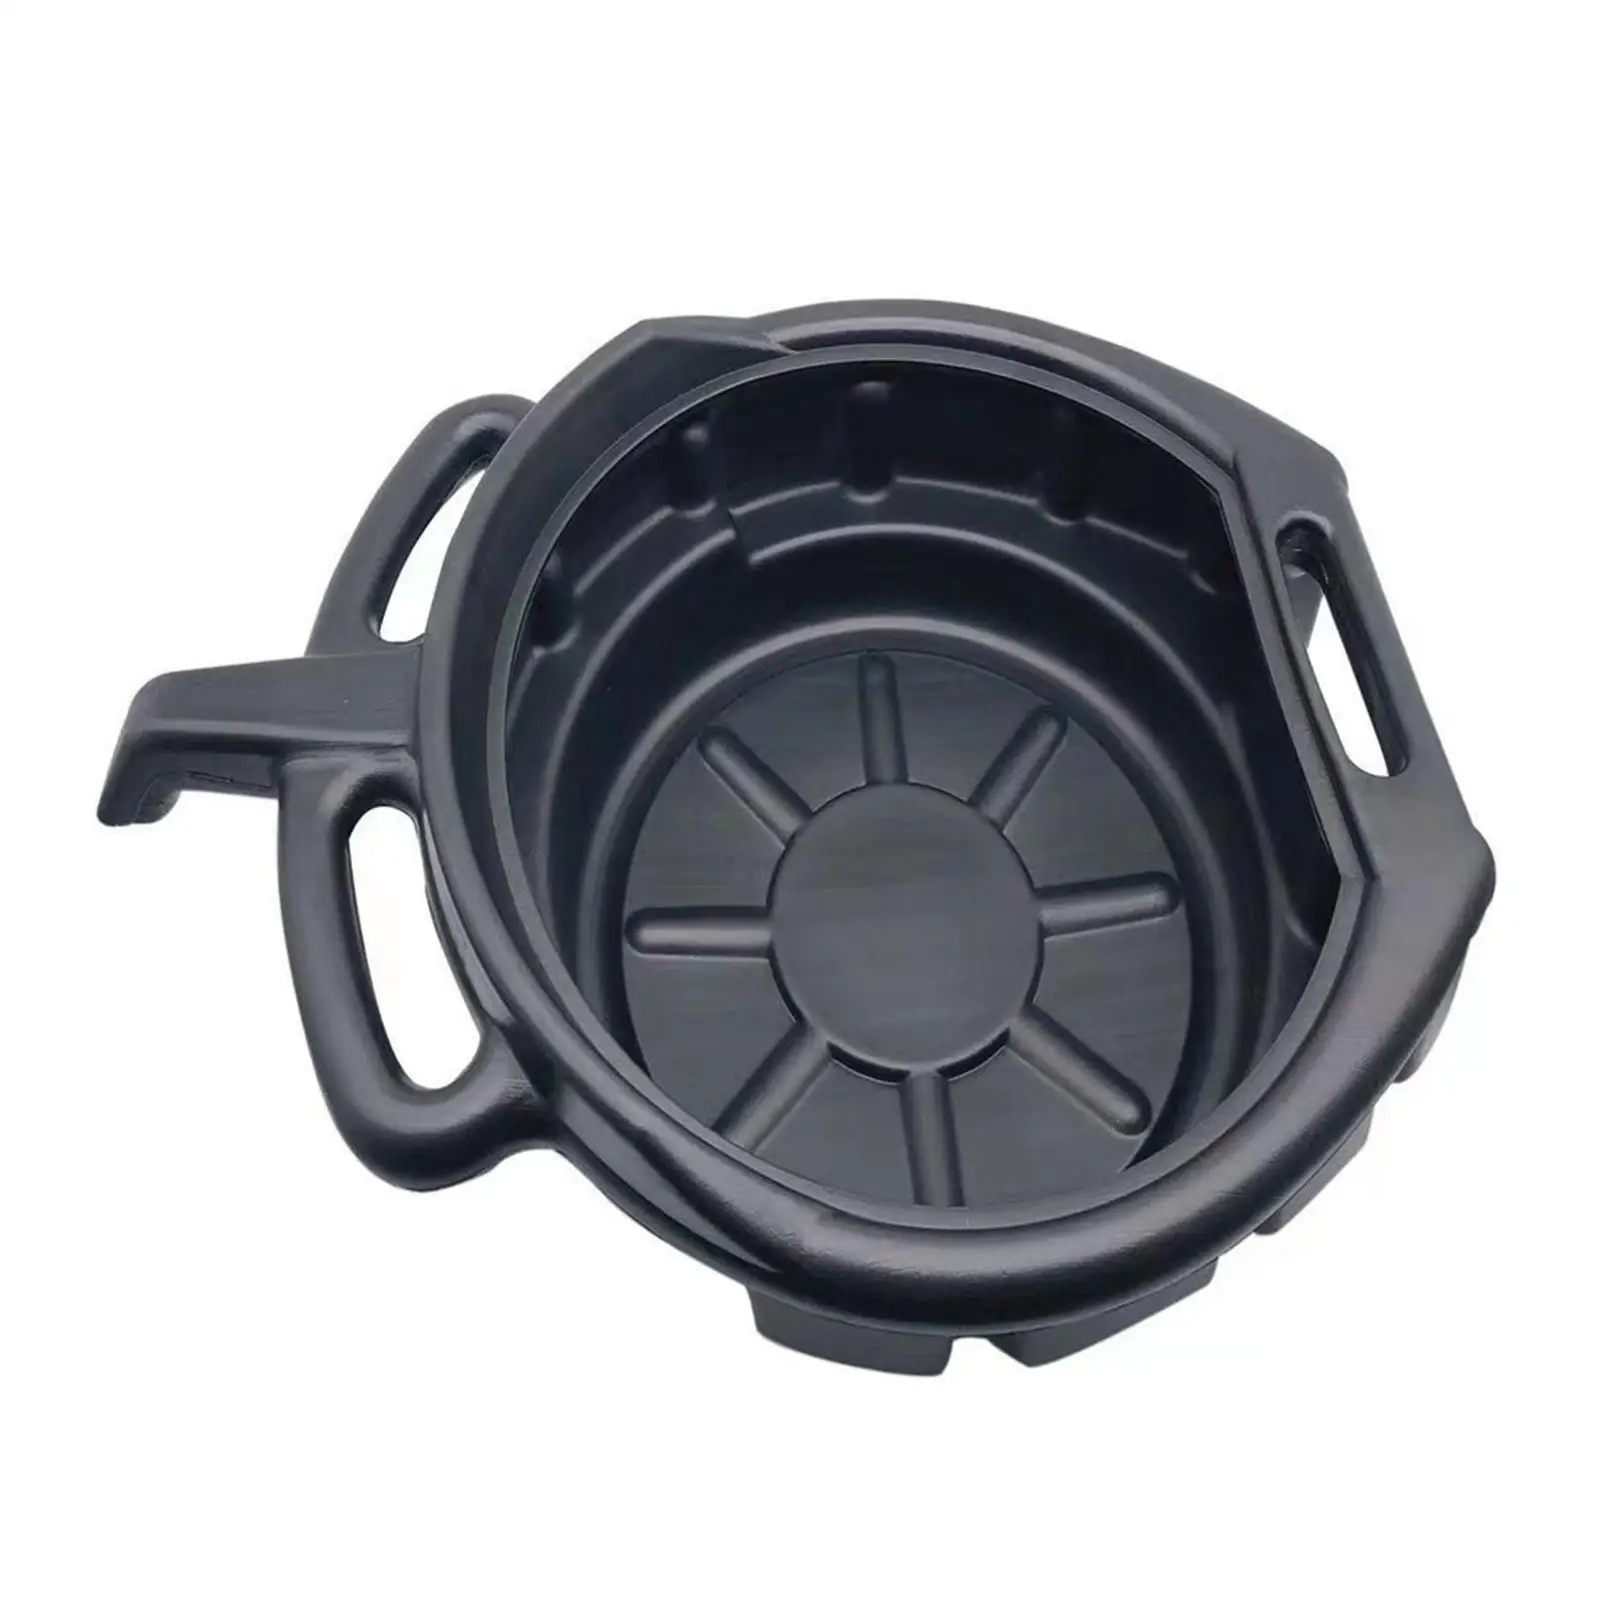 Oil Drain Can Tray Oil Catches Can Reservoir Tank Universal Multifunction Drain Pan Garage Tool for Vehicle Boat Car Workshop